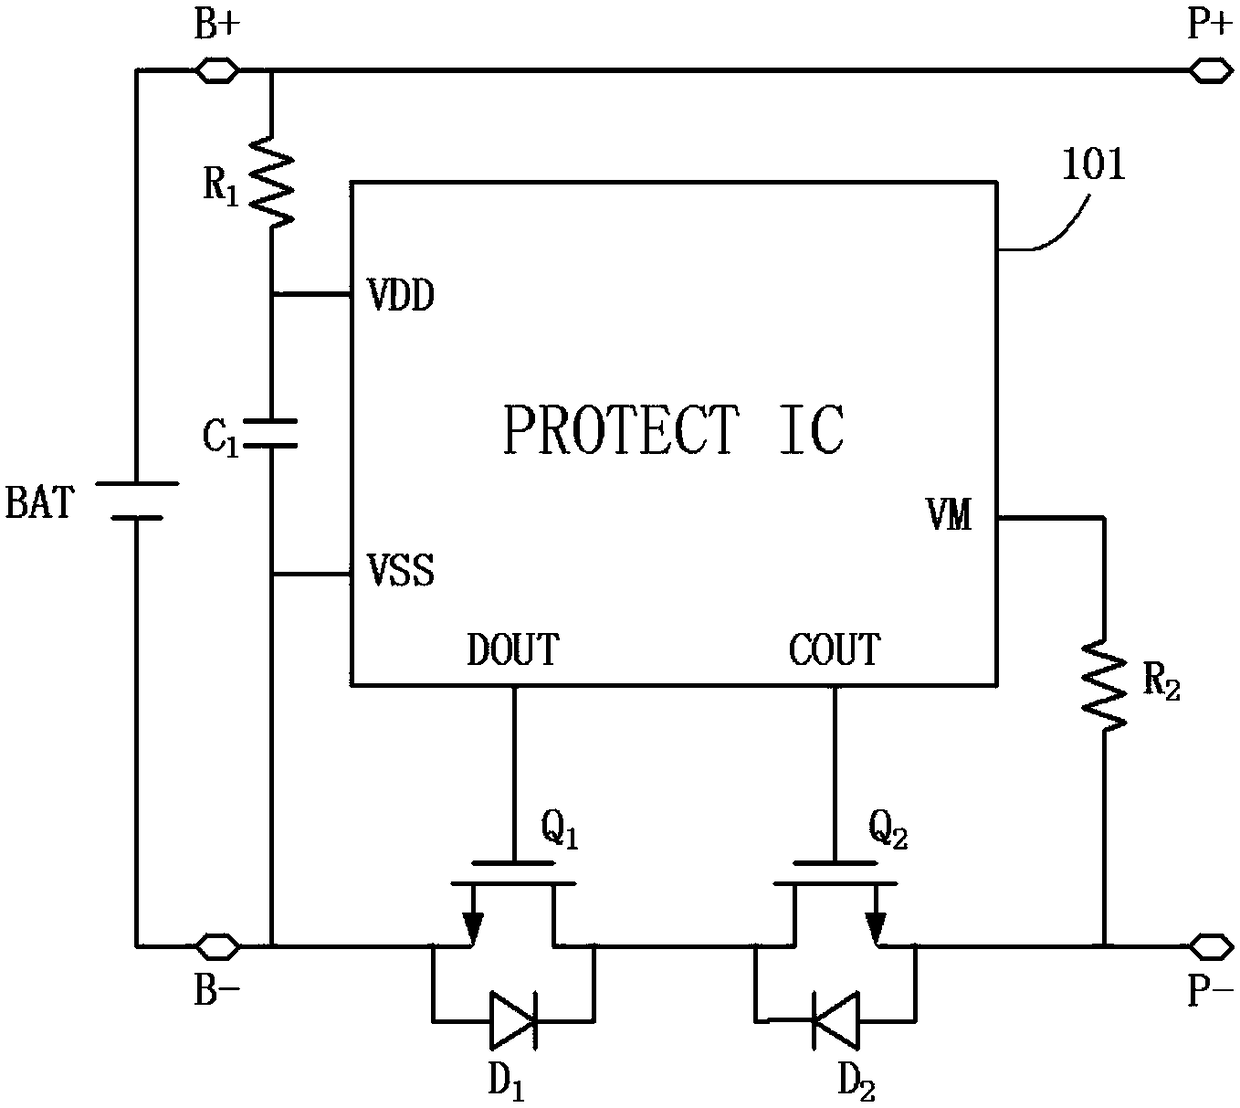 Overcurrent detection, protection circuit and battery